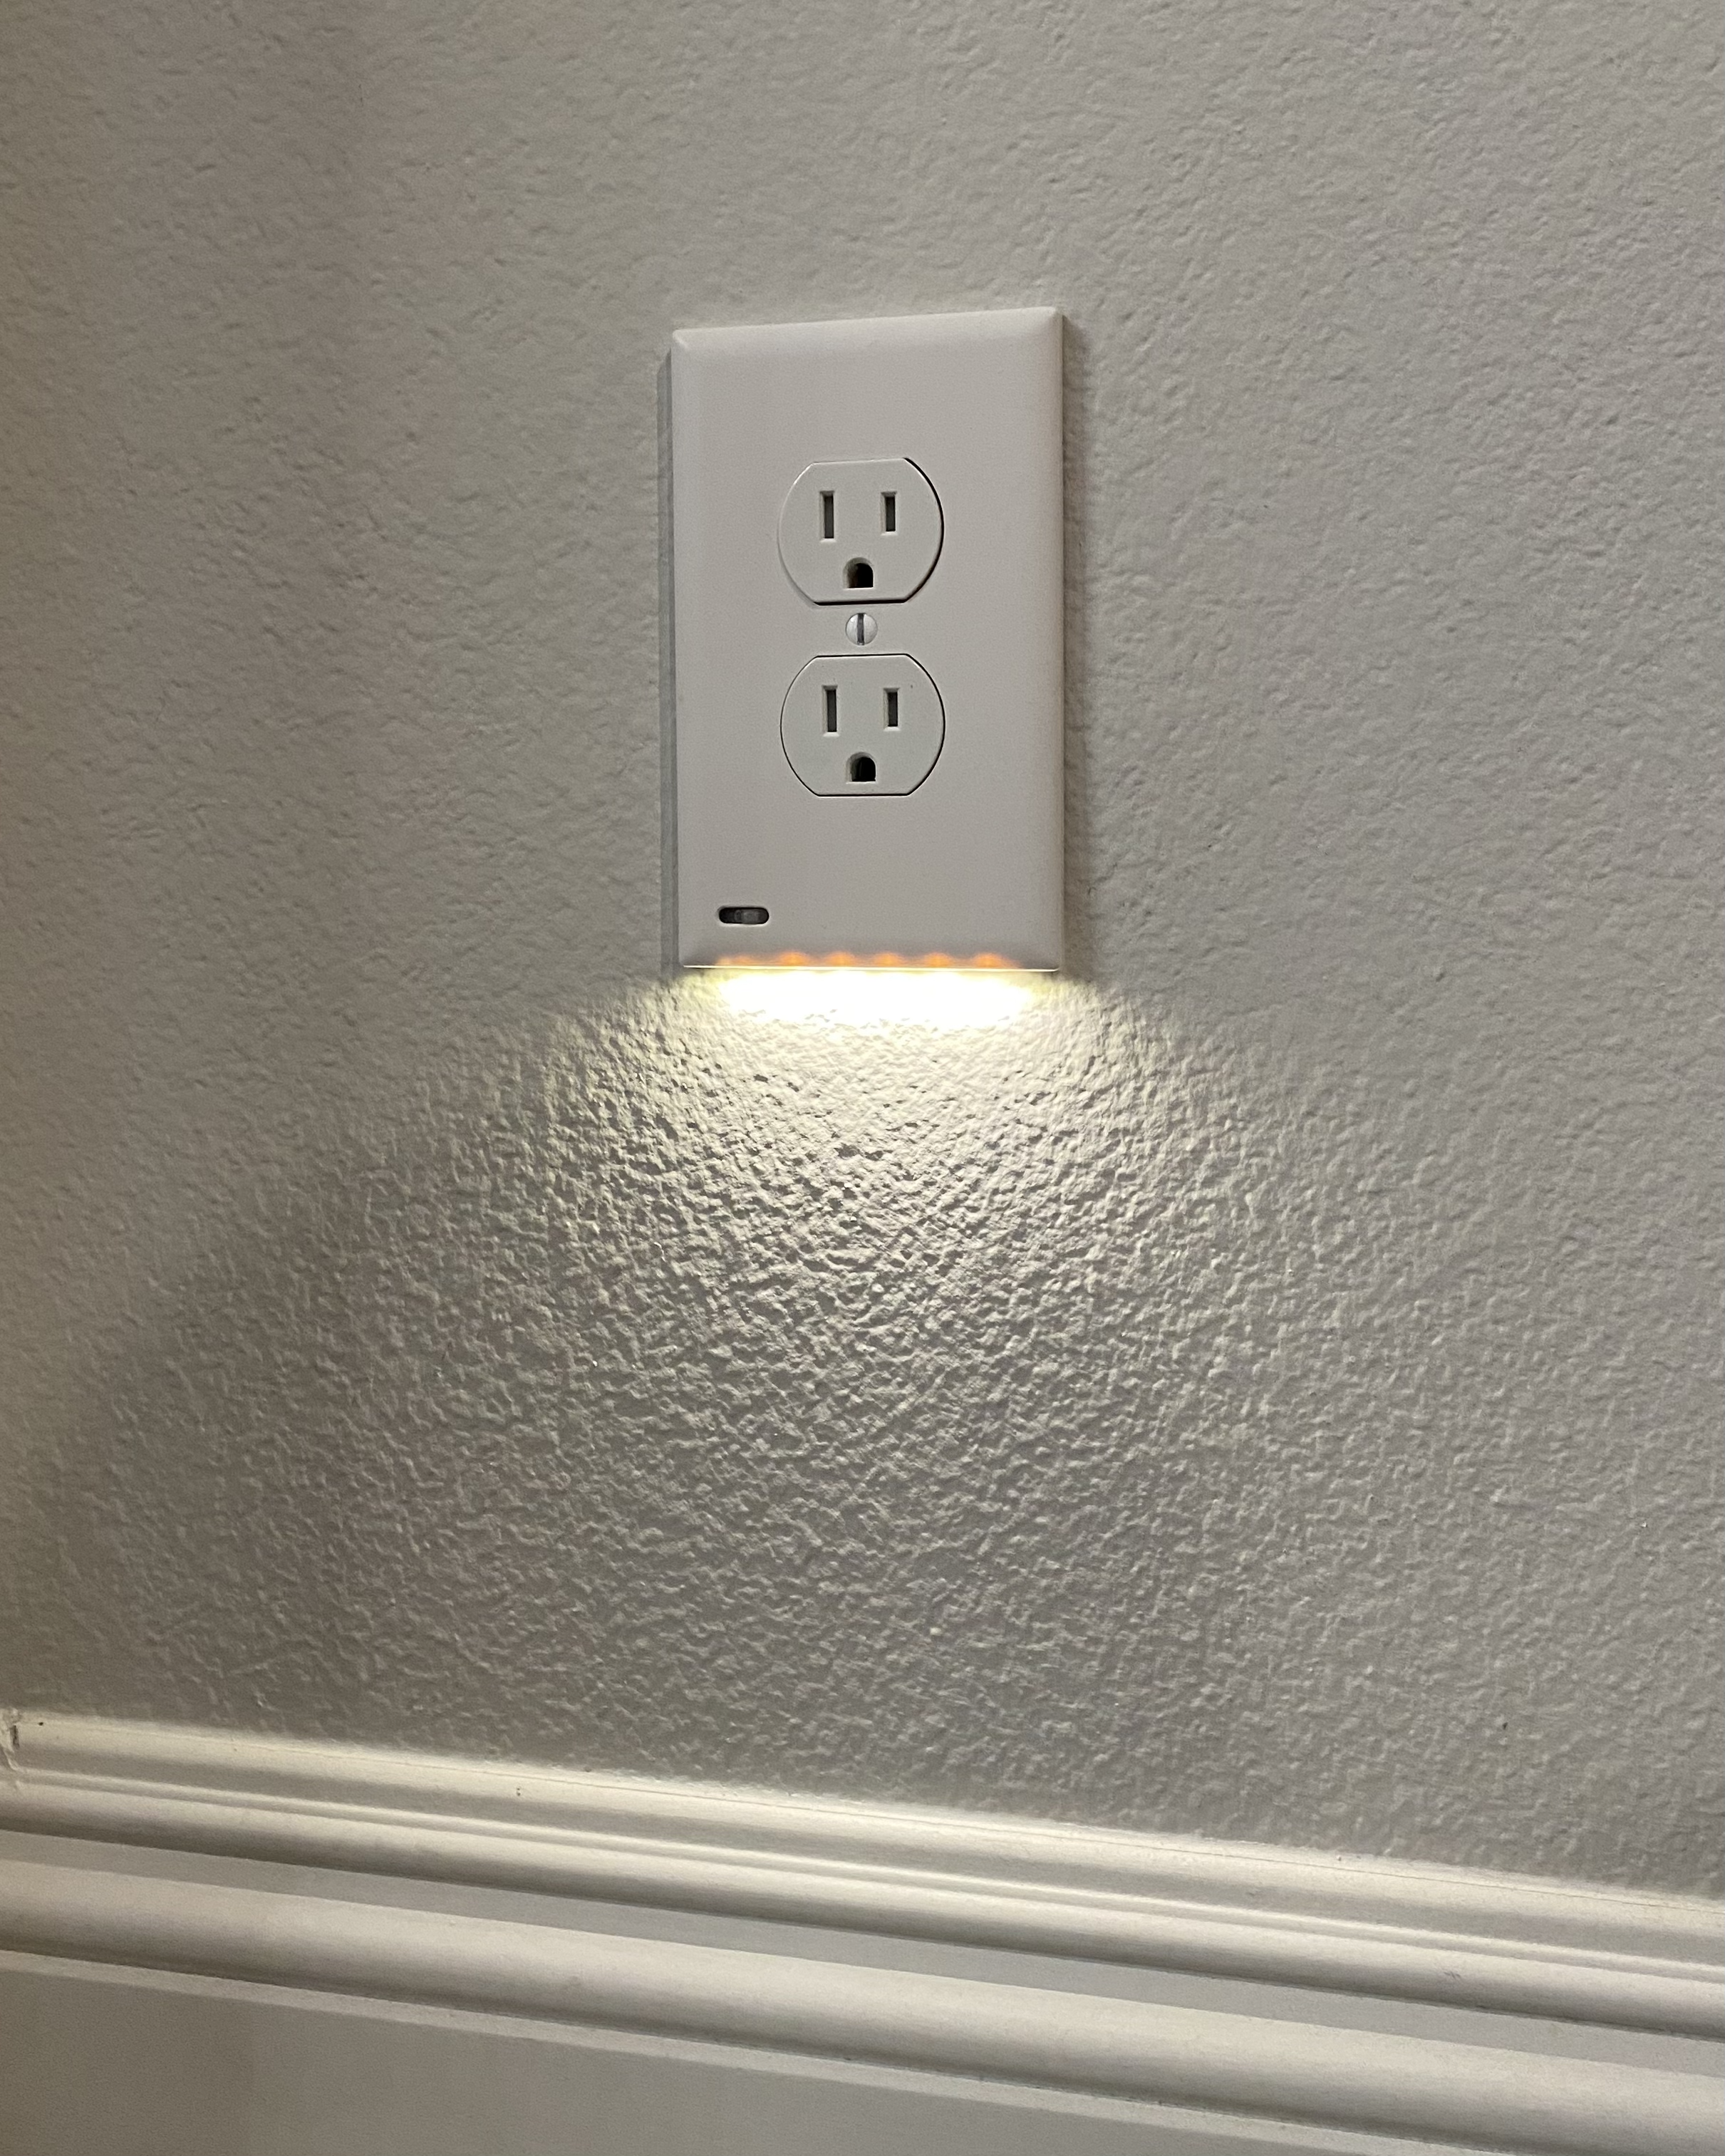 How to Replace an Outlet Plug